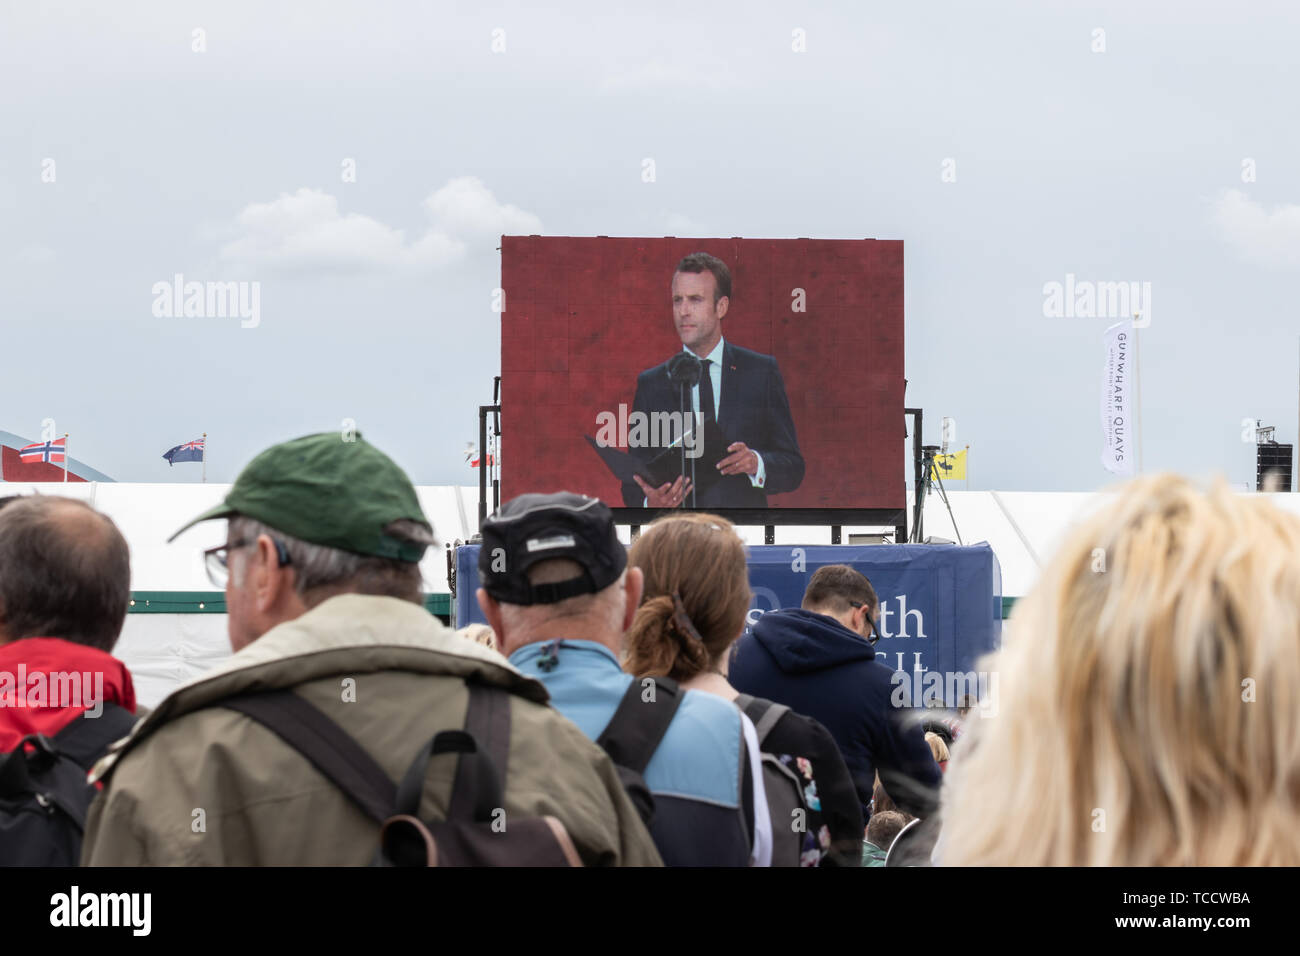 A crowd look up at a big screen while Emmanuel Macron the french president gives a speech Stock Photo